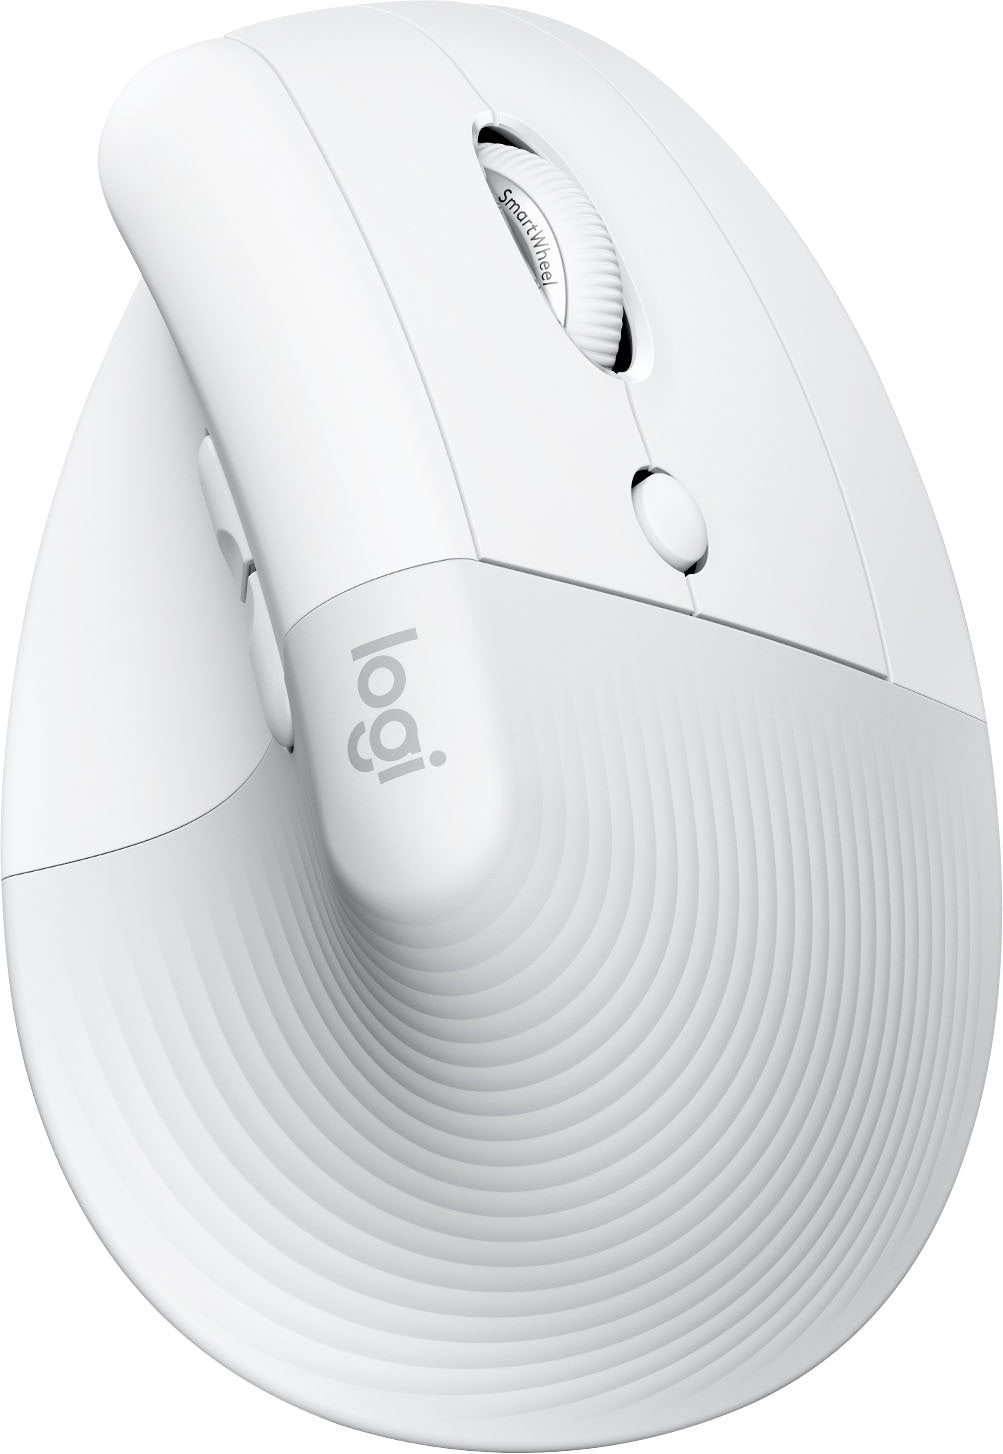 Logitech - Lift for Mac Bluetooth Ergonomic Mouse with 4 Customizable Buttons - Off-White_0